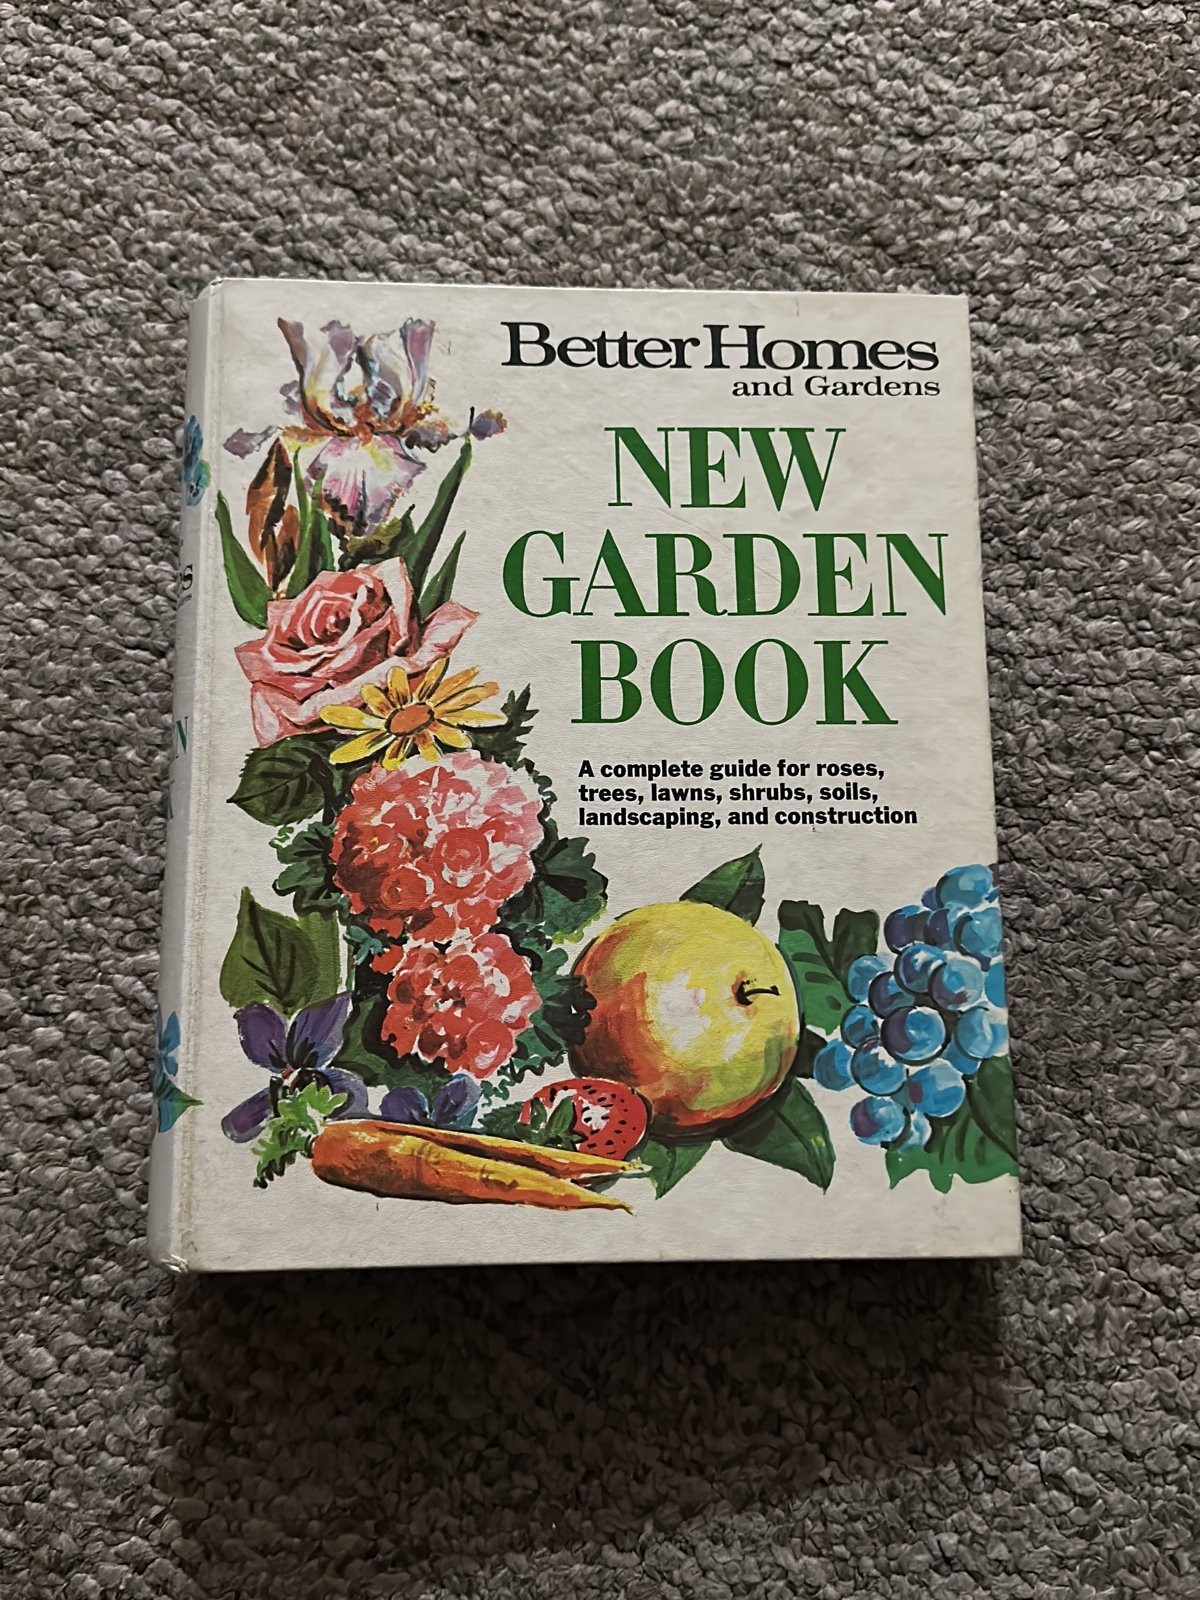 Better Homes and Gardens vintage book l3kr3xI2t